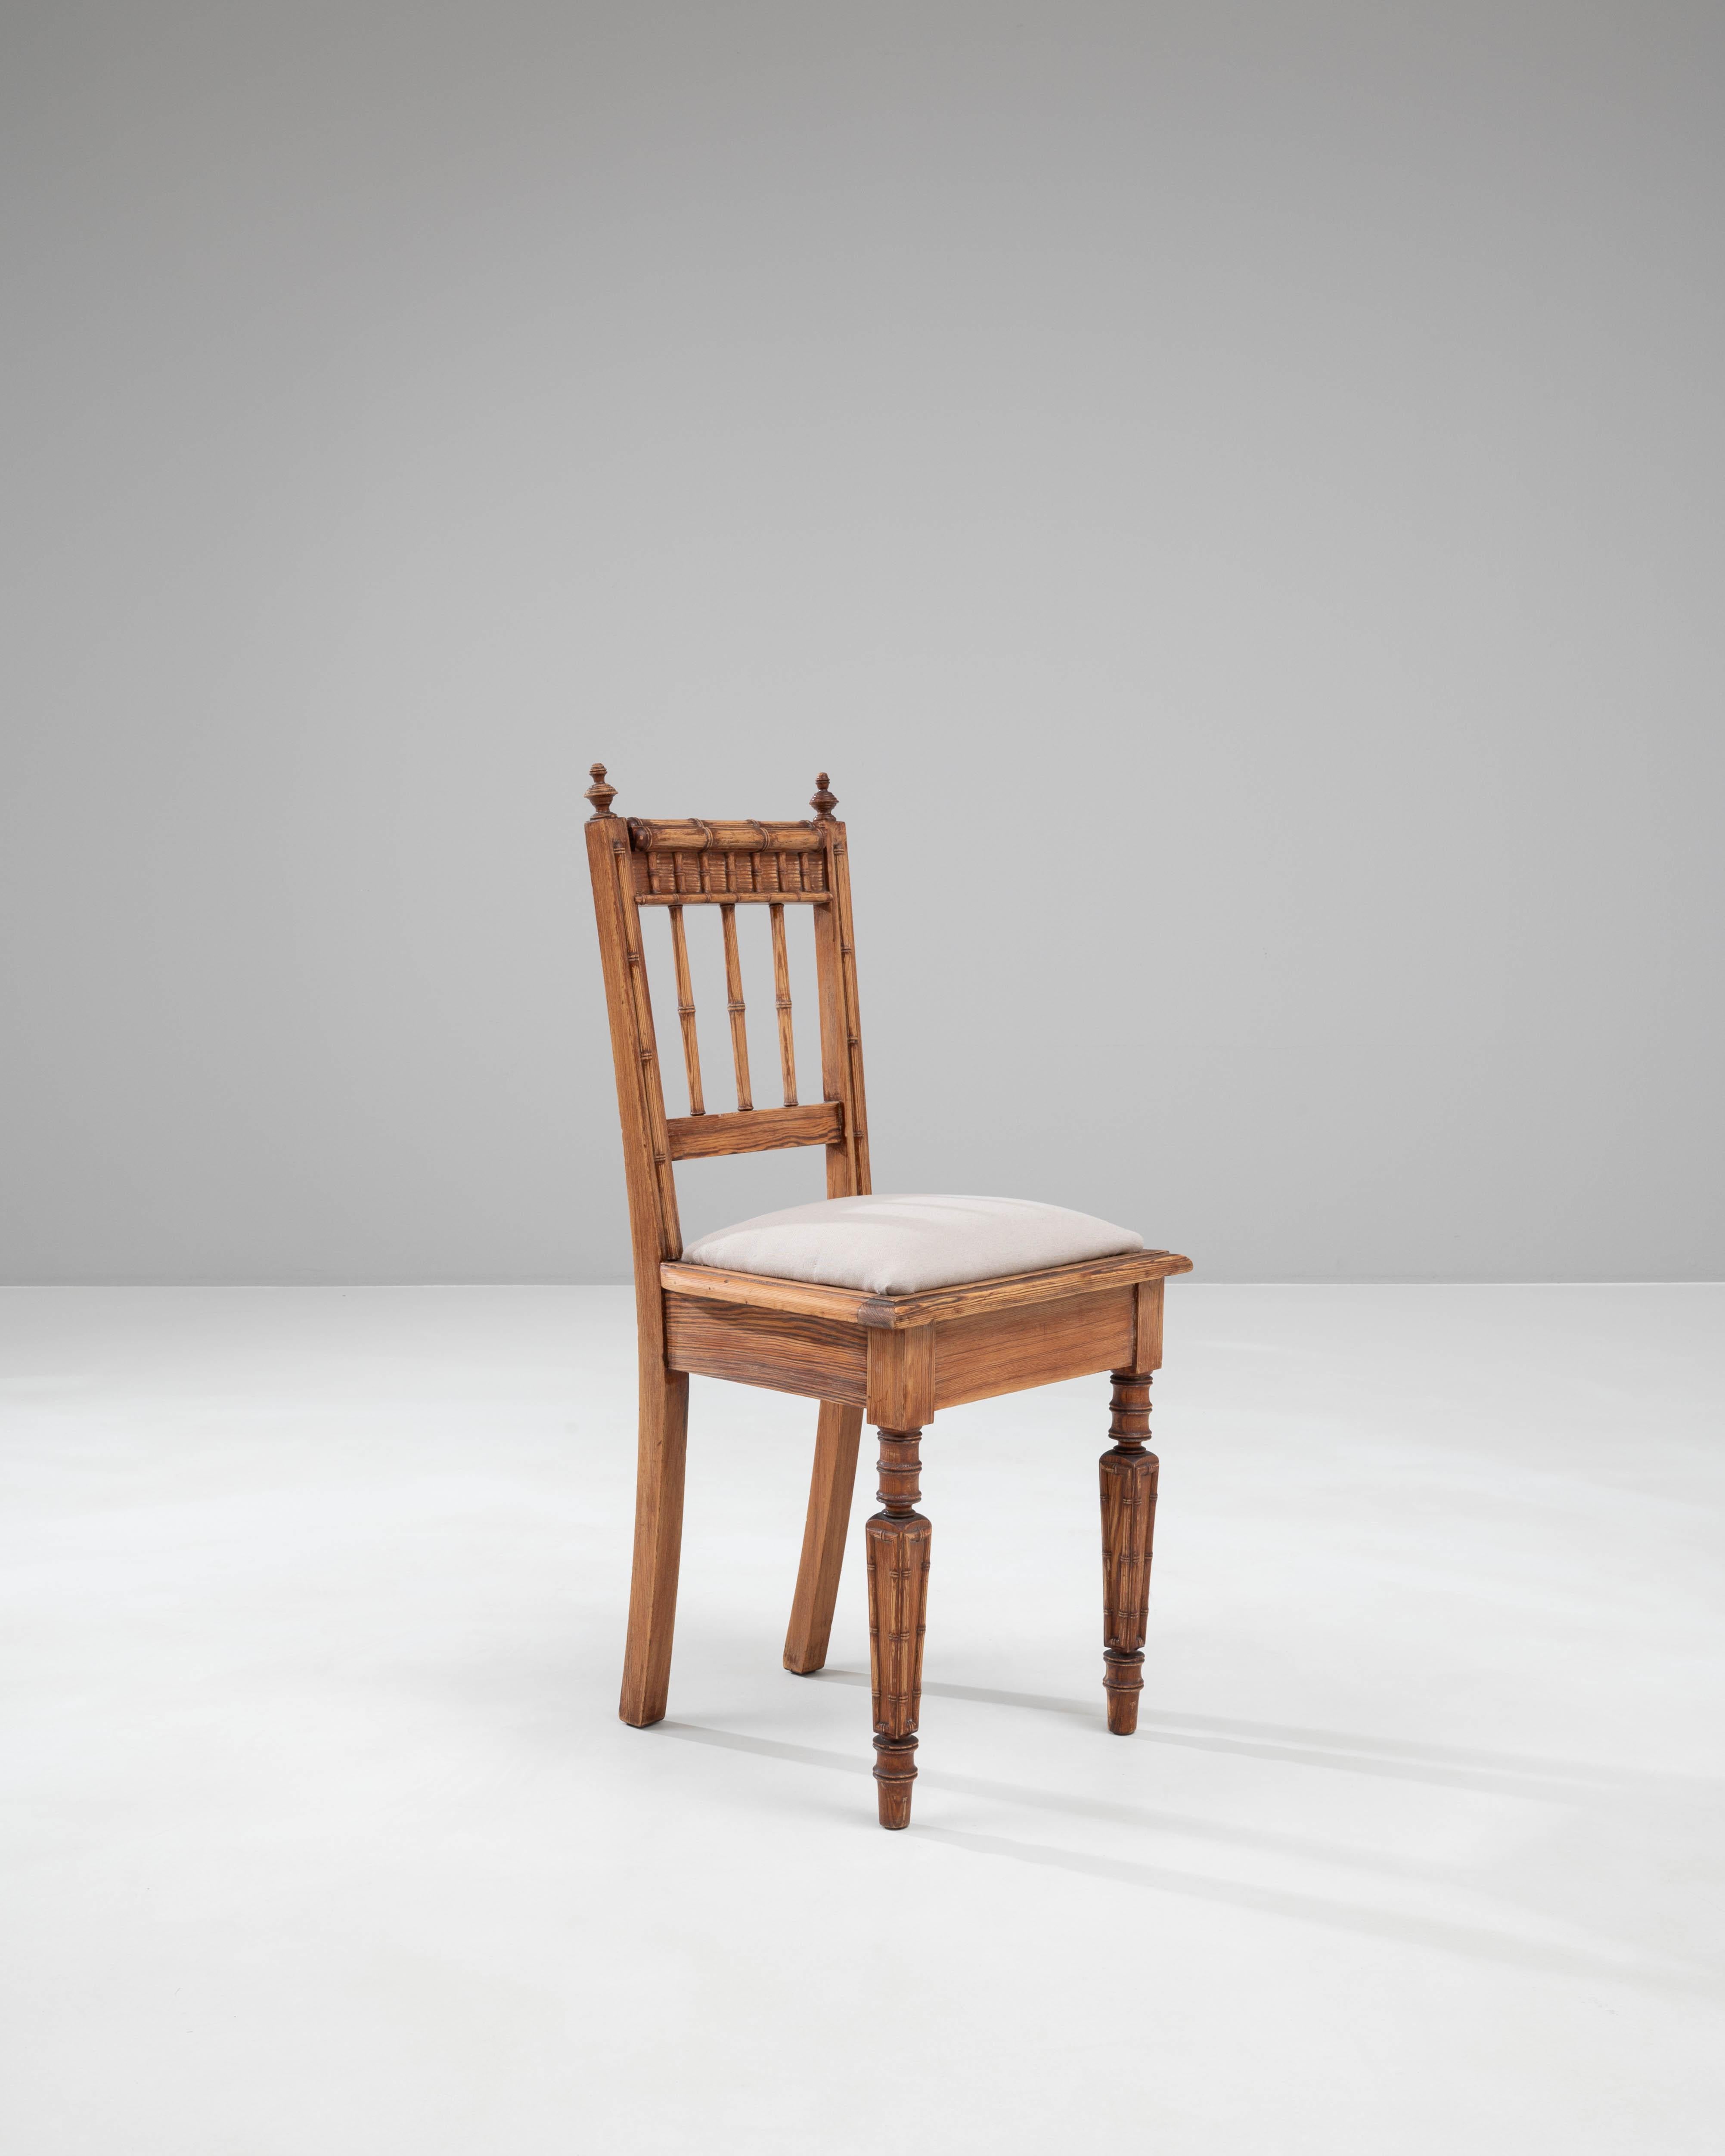 19th Century French Wooden Chair With Upholstered Seat For Sale 4